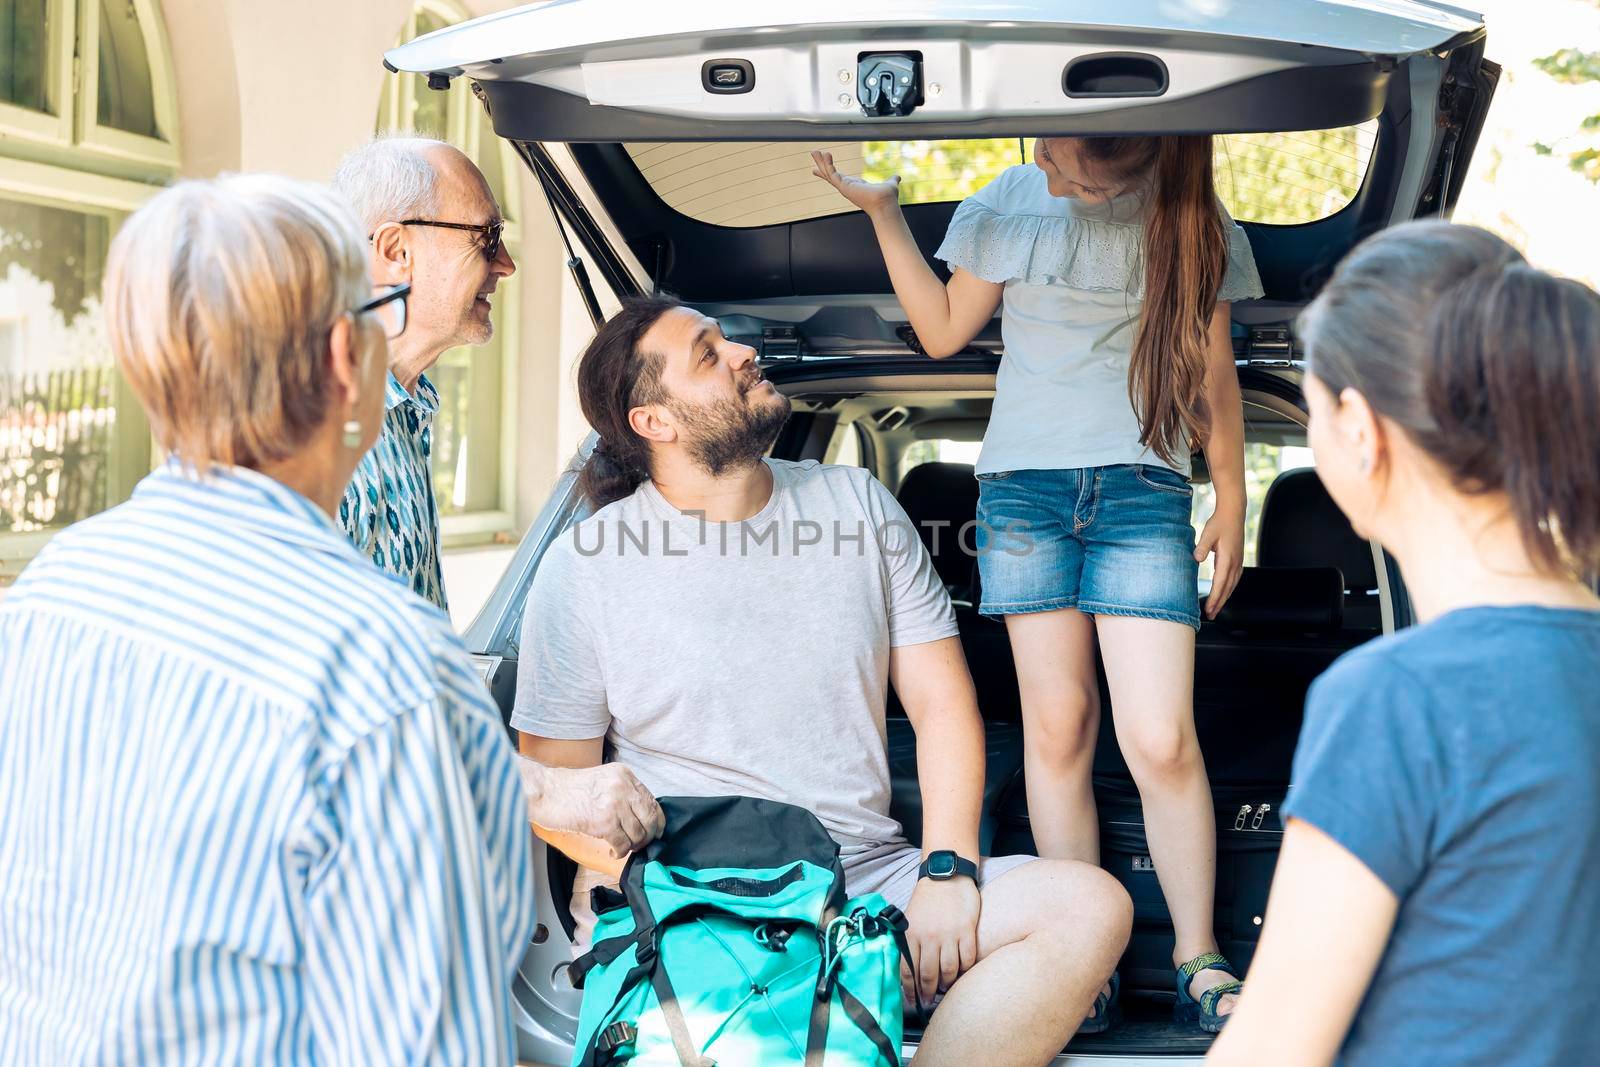 European people travelling on holiday vacation with little child, parents and grandparents. Going on summer journey at seaside with inflatable and travel bags, leaving with luggage and suitcase.